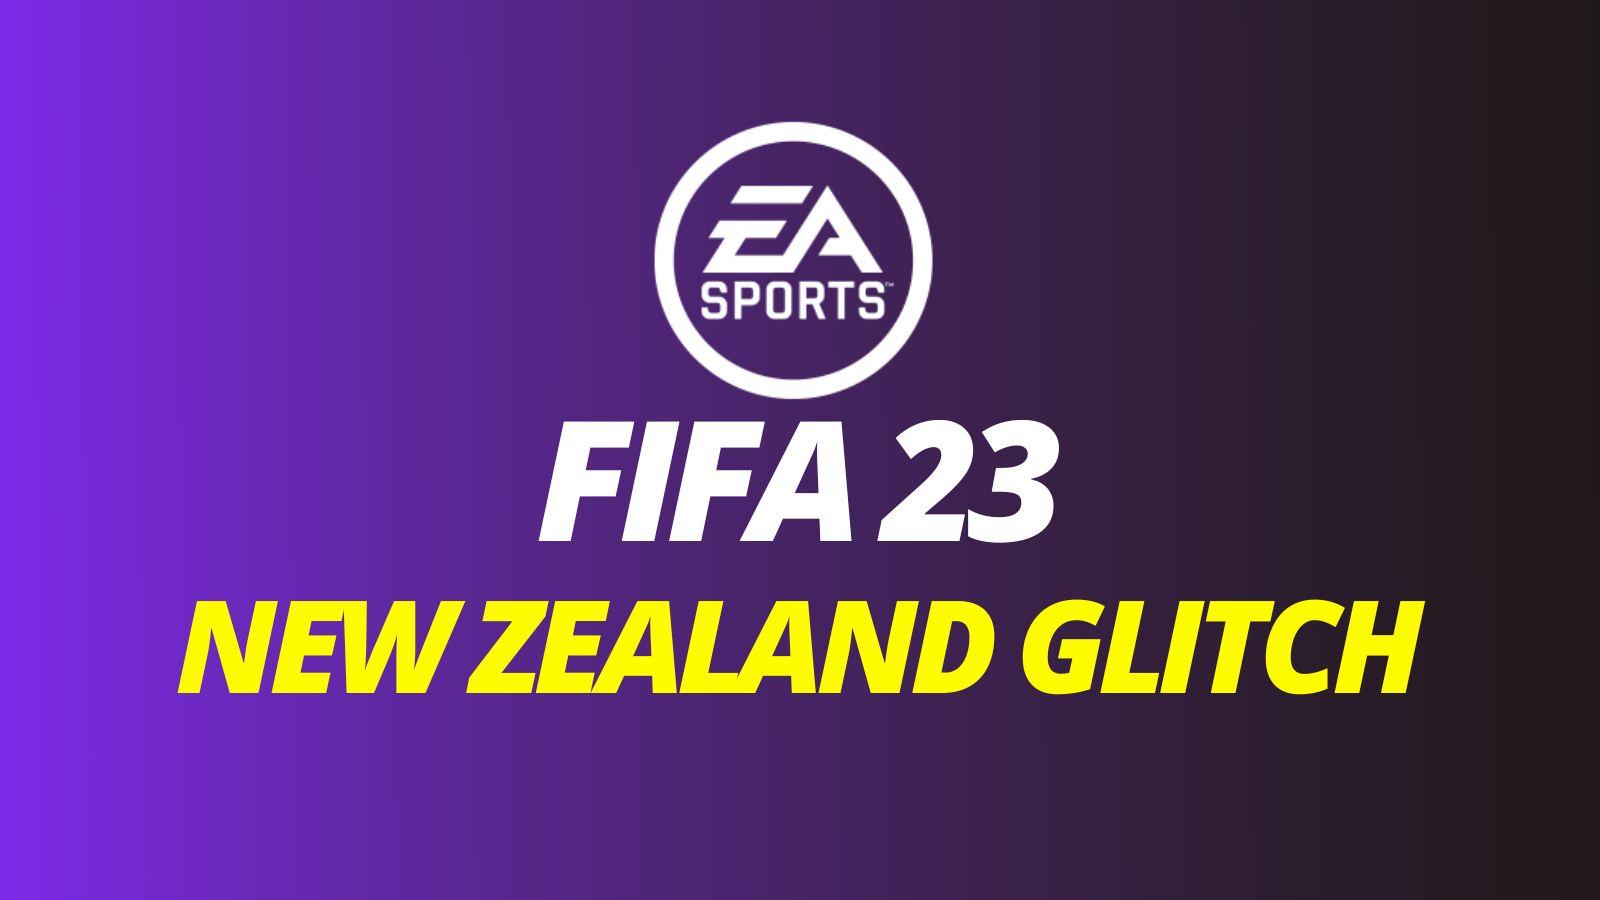 Fifa 23 EA Play Early/Trial PS5 & PS4 